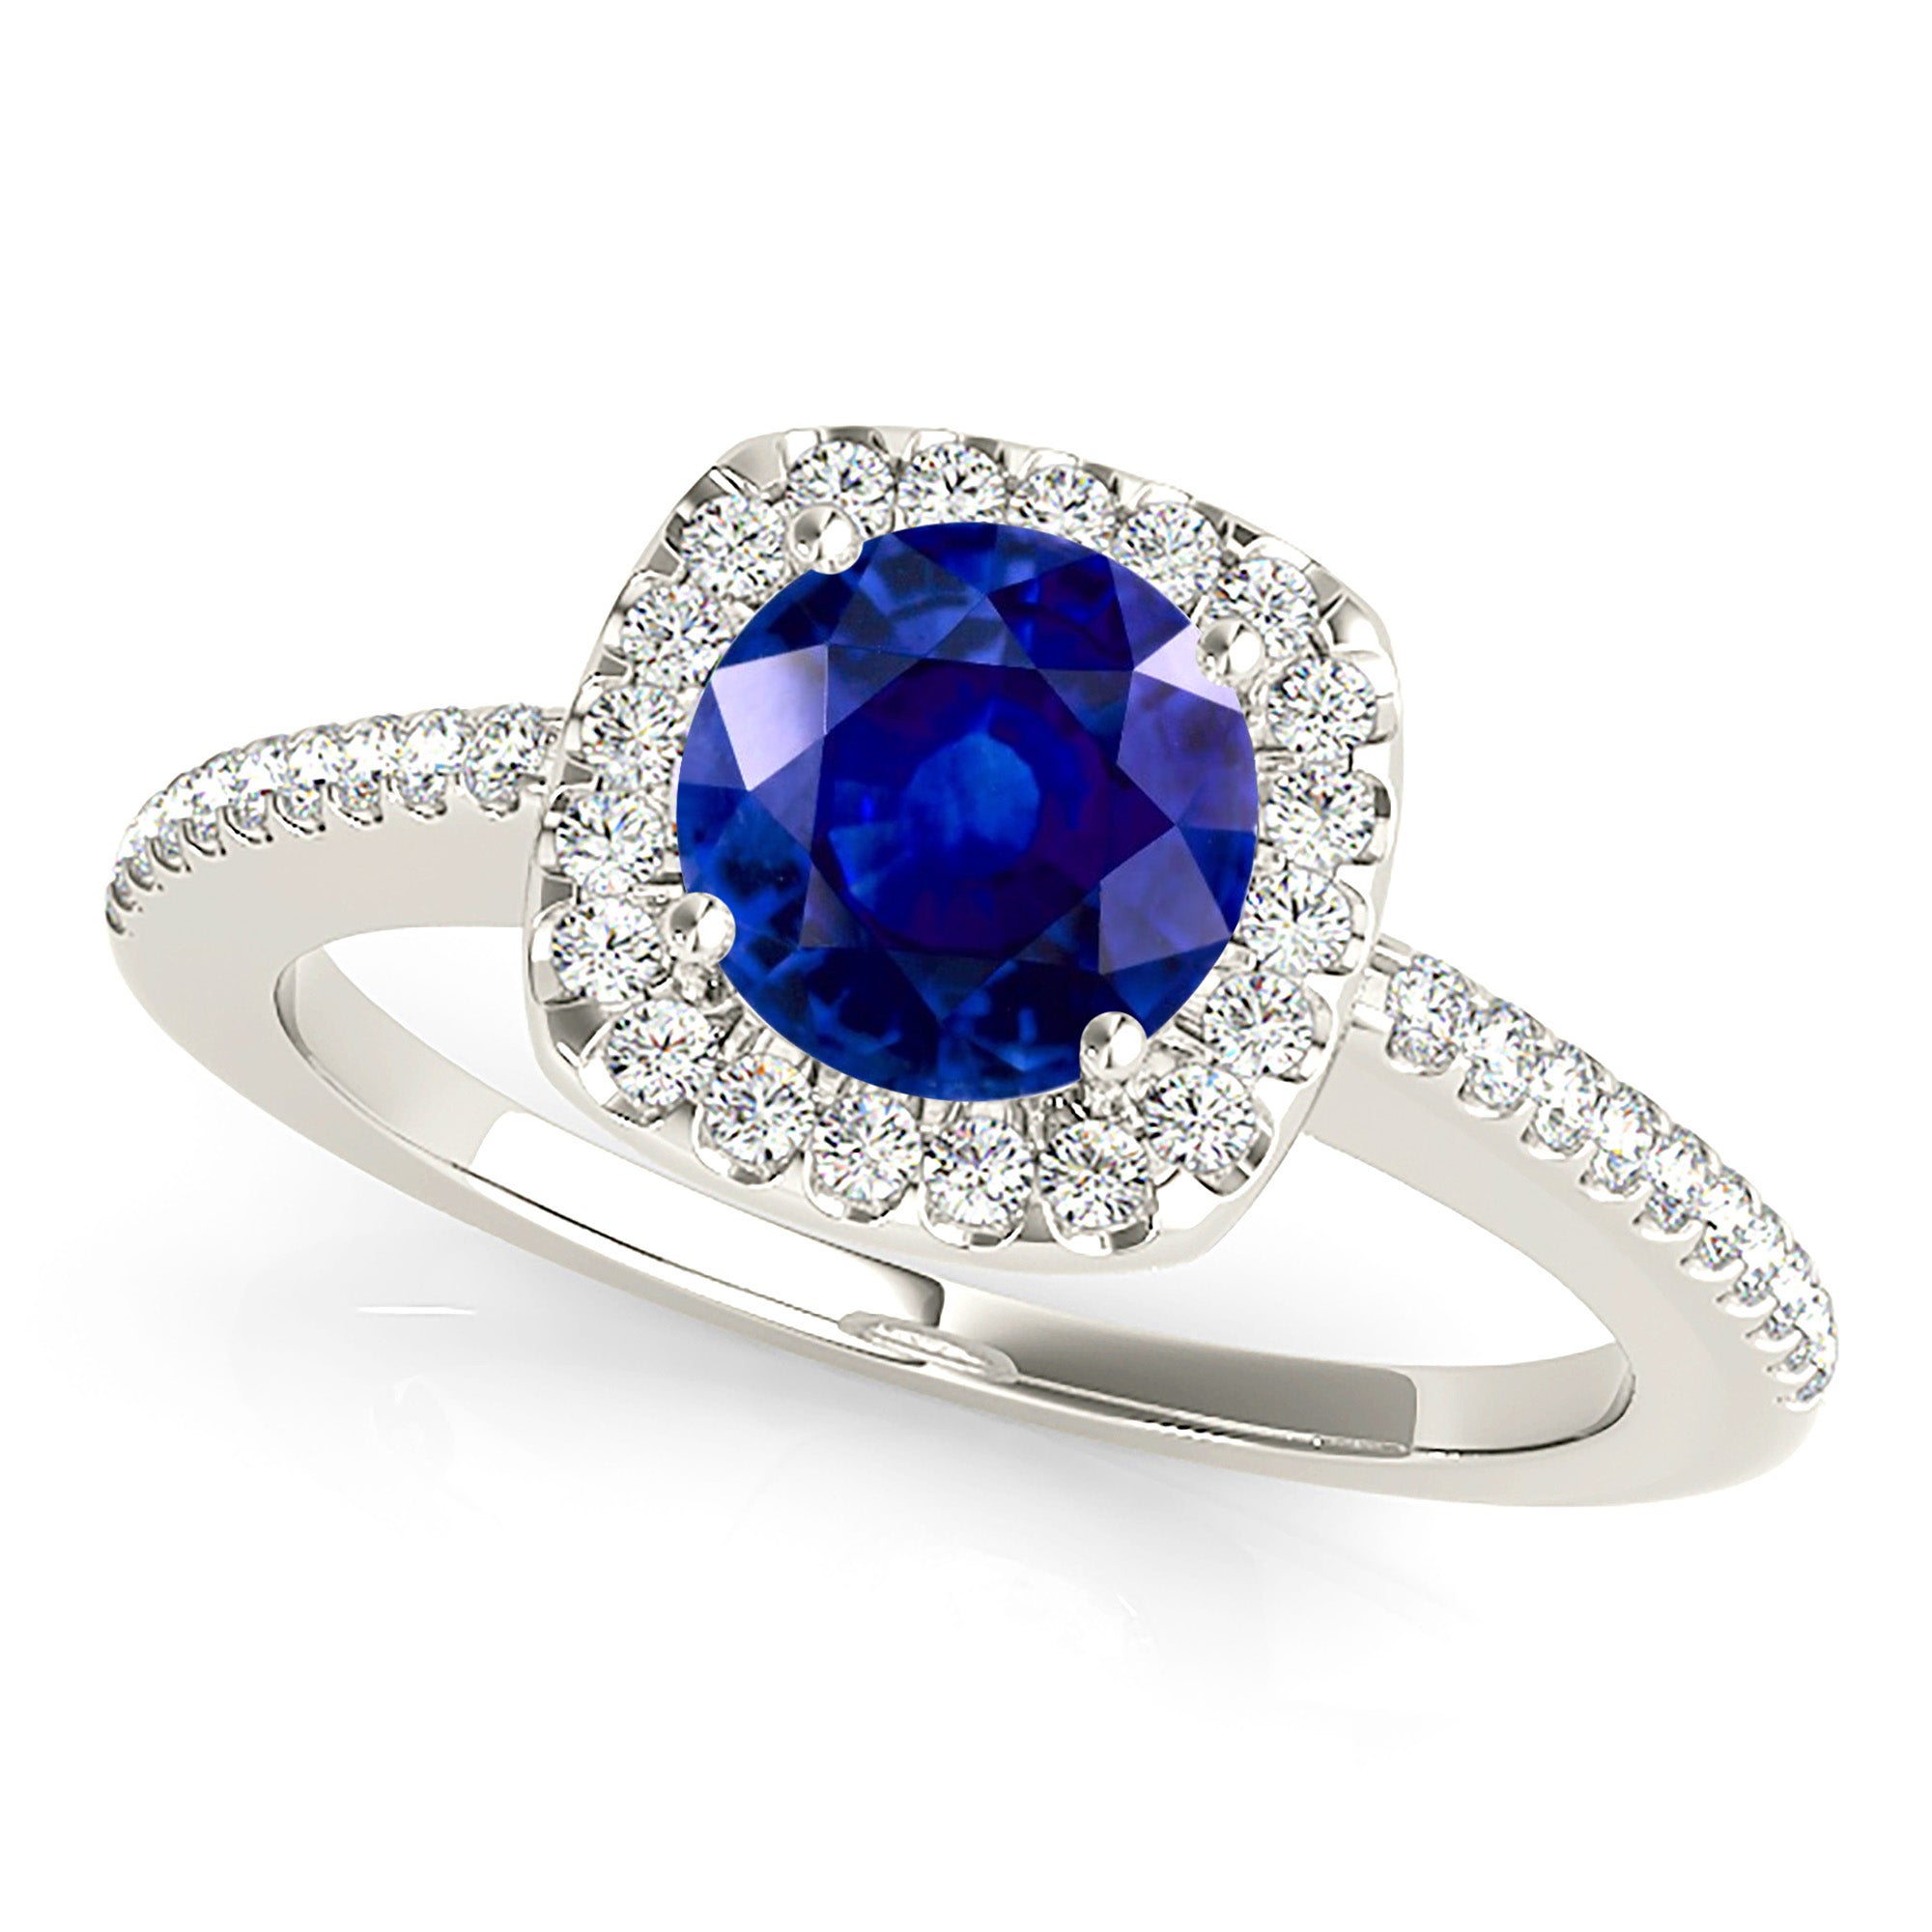 1.46 ct. Genuine Blue Sapphire Halo Ring with 0.25 ctw. Side Diamonds-in 14K/18K White, Yellow, Rose Gold and Platinum - Christmas Jewelry Gift -VIRABYANI